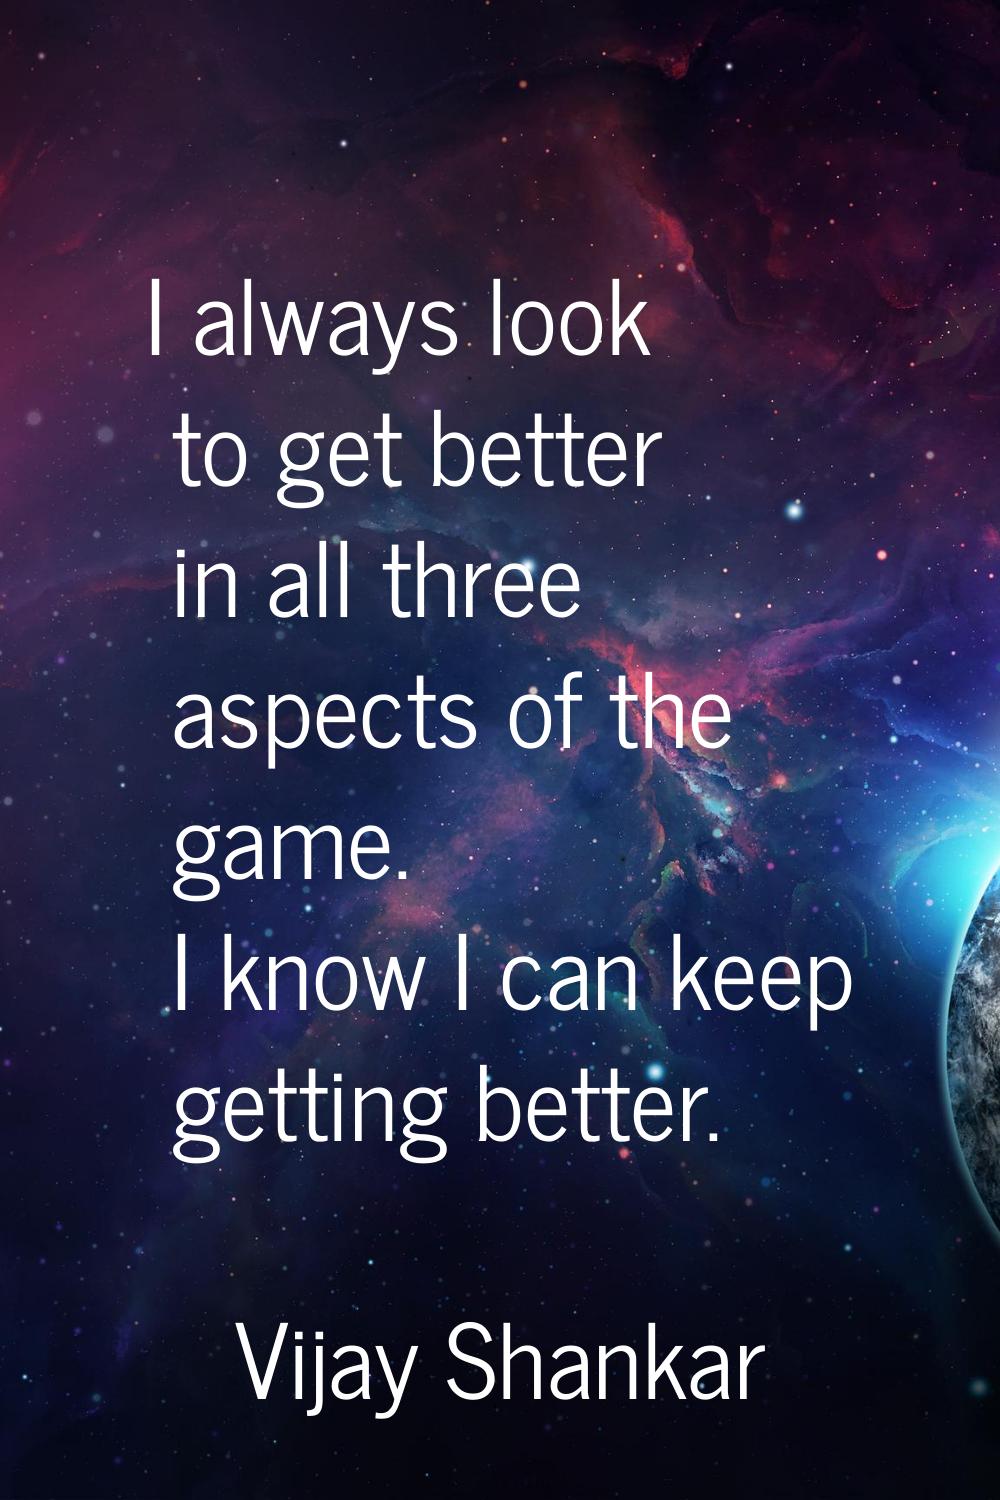 I always look to get better in all three aspects of the game. I know I can keep getting better.